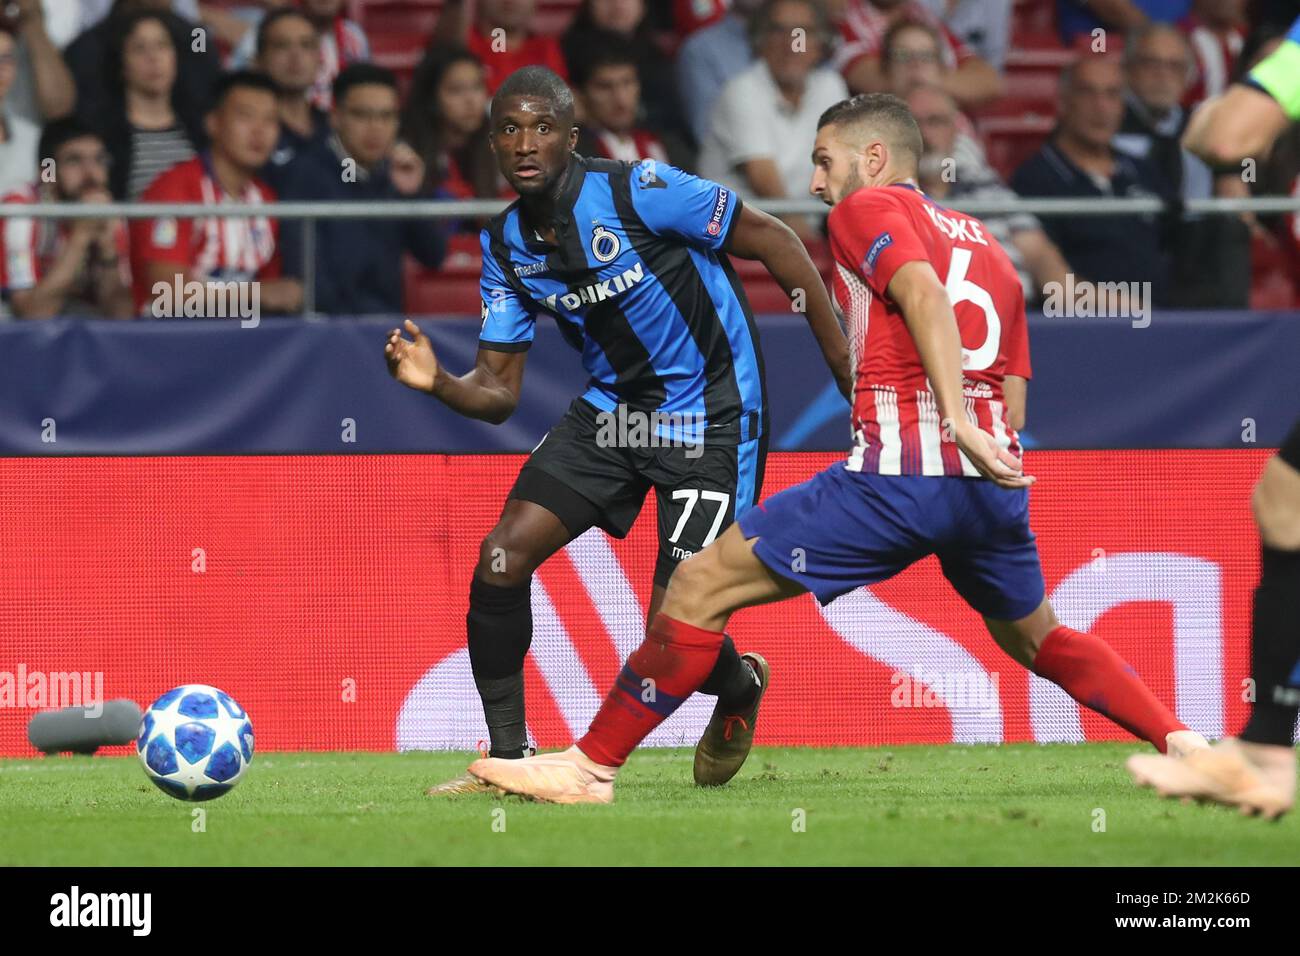 Club's Clinton Mata and Atletico's 'Koke' Jorge Resurreccion Merodio fight for the ball during the match between Belgian soccer team Club Brugge KV and Atletico Madrid, in group A on day two the UEFA Champions League, in Mardid, Spain, Wednesday 03 October 2018. BELGA PHOTO BRUNO FAHY Stock Photo